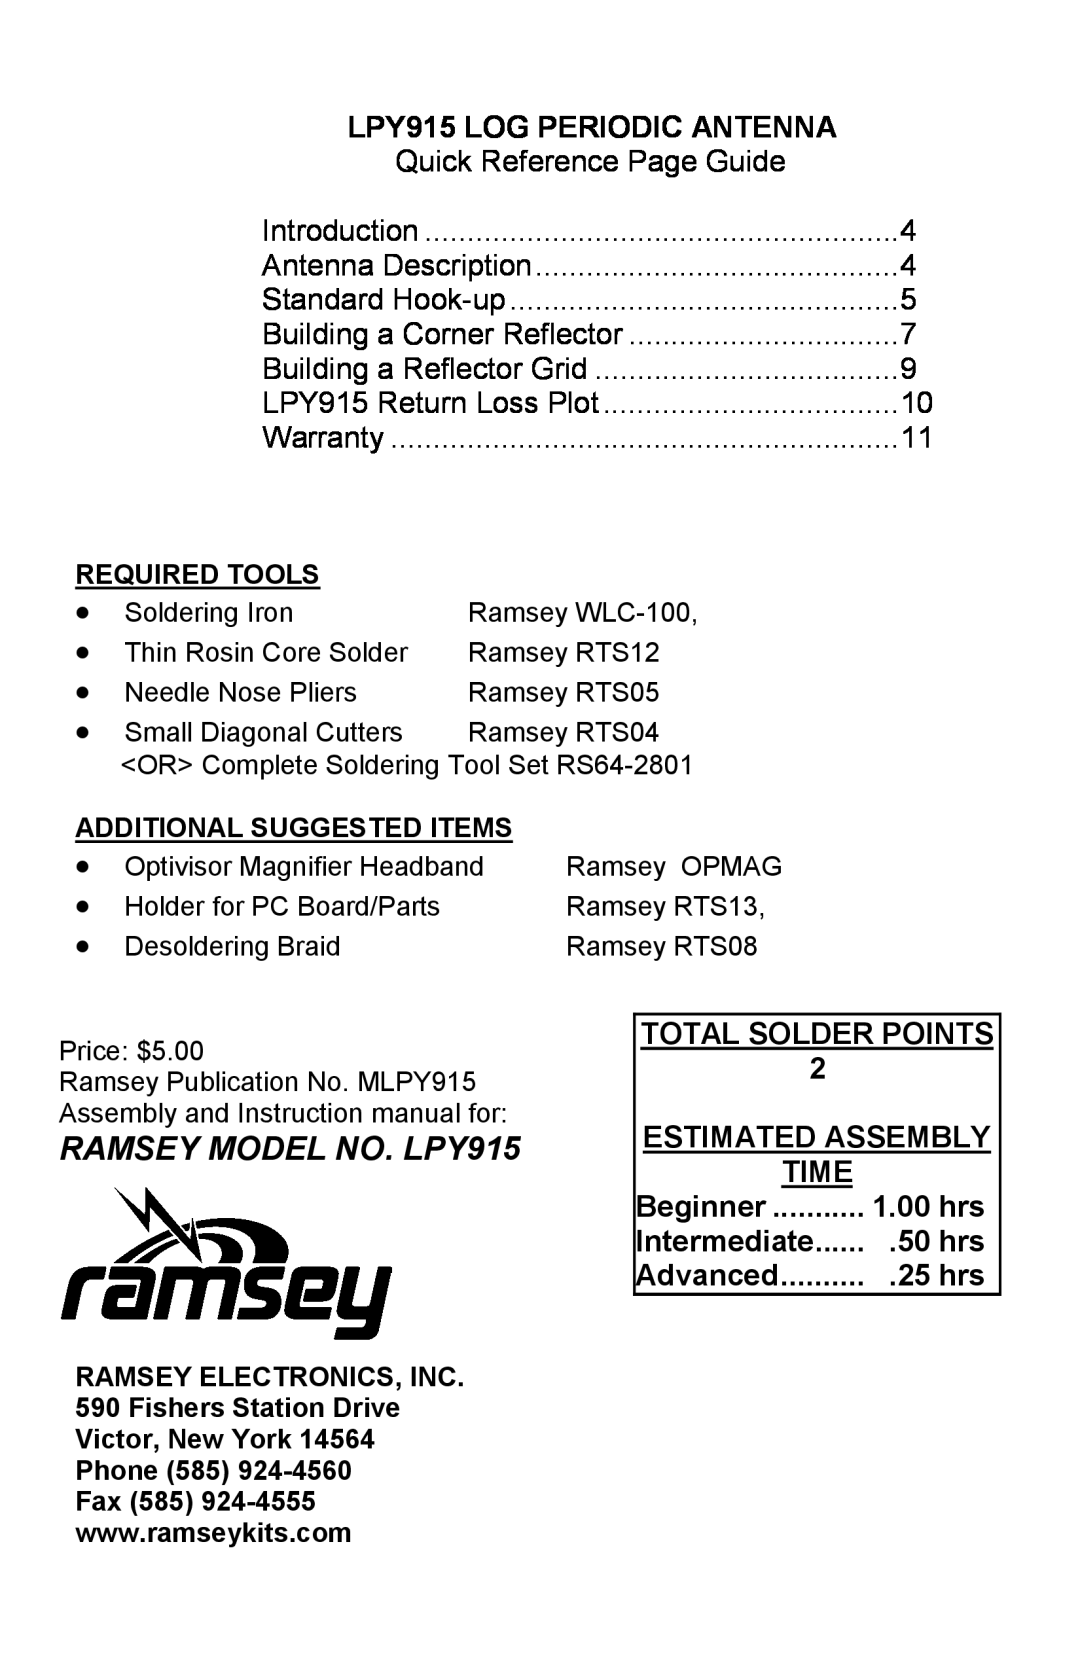 Ramsey Electronics RAMSEY MODEL NO. LPY915, LPY915 LOG PERIODIC ANTENNA, TOTAL SOLDER POINTS 2 ESTIMATED ASSEMBLY, Time 